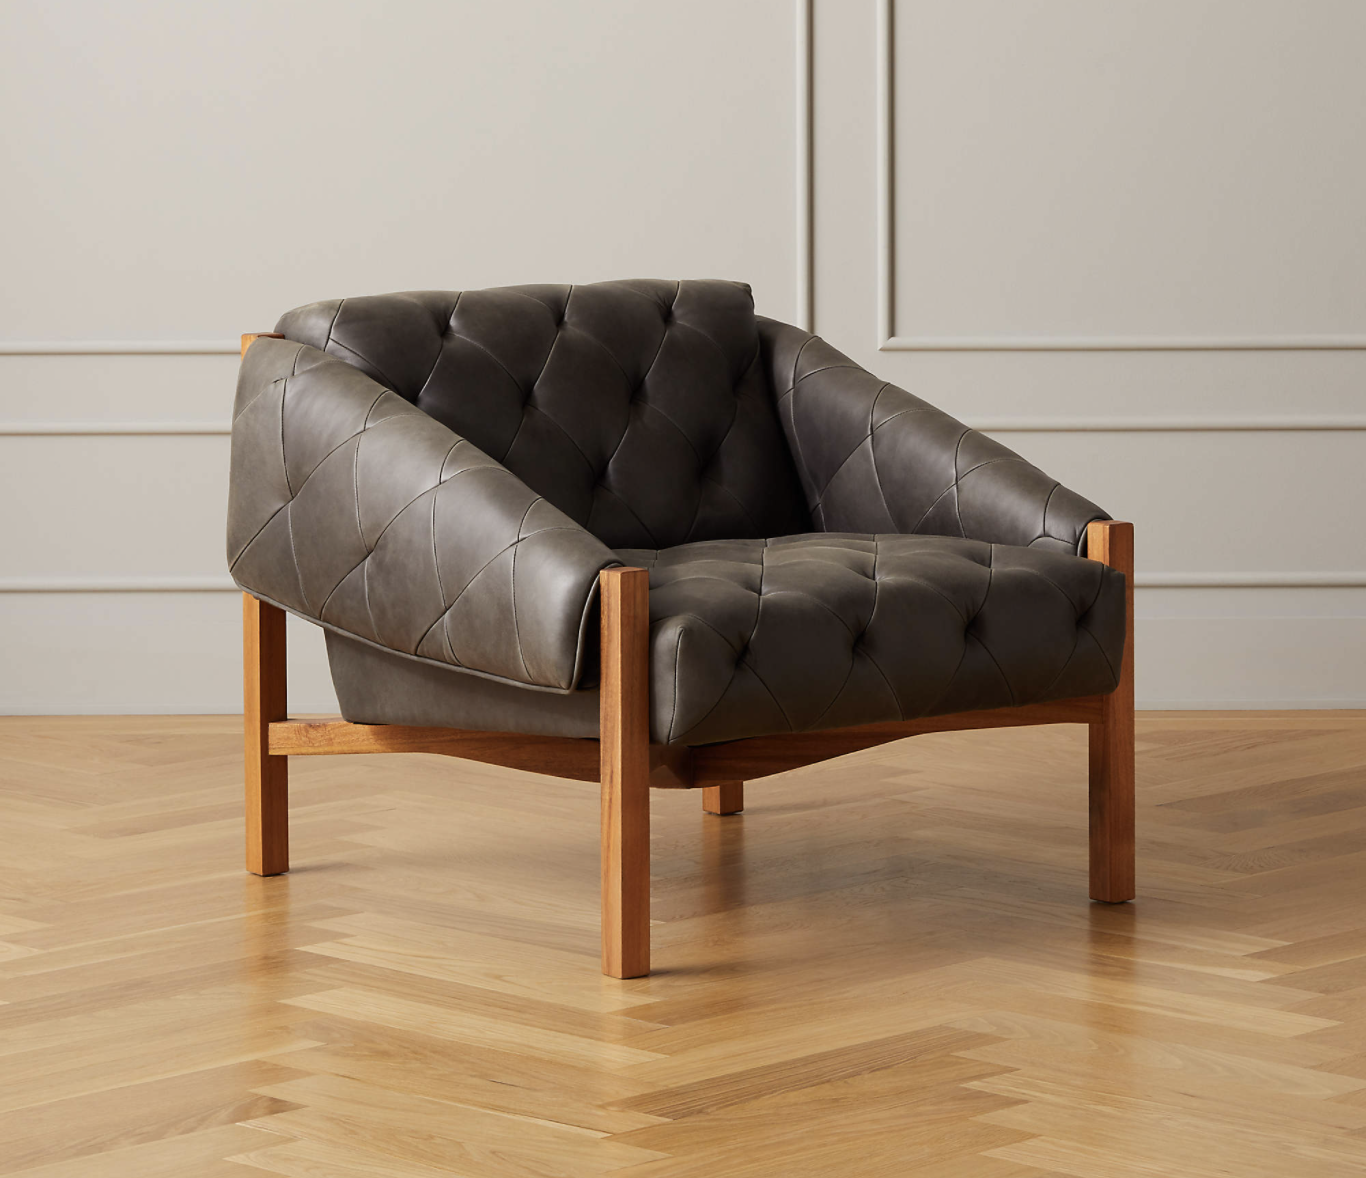 Tufted Leather Lounger